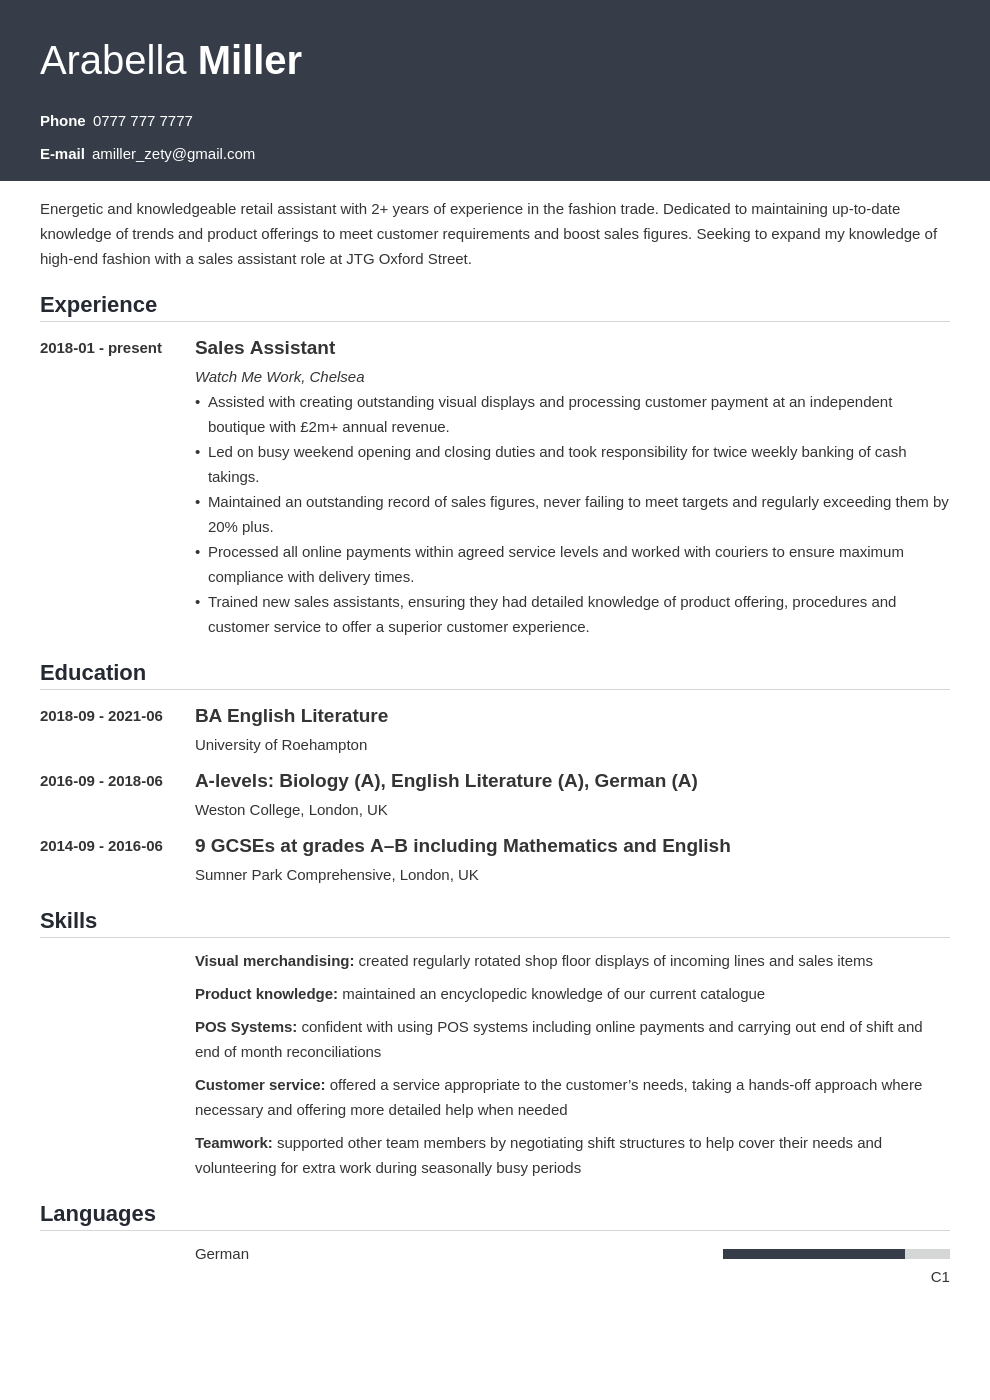 what to write in the education section of a resume